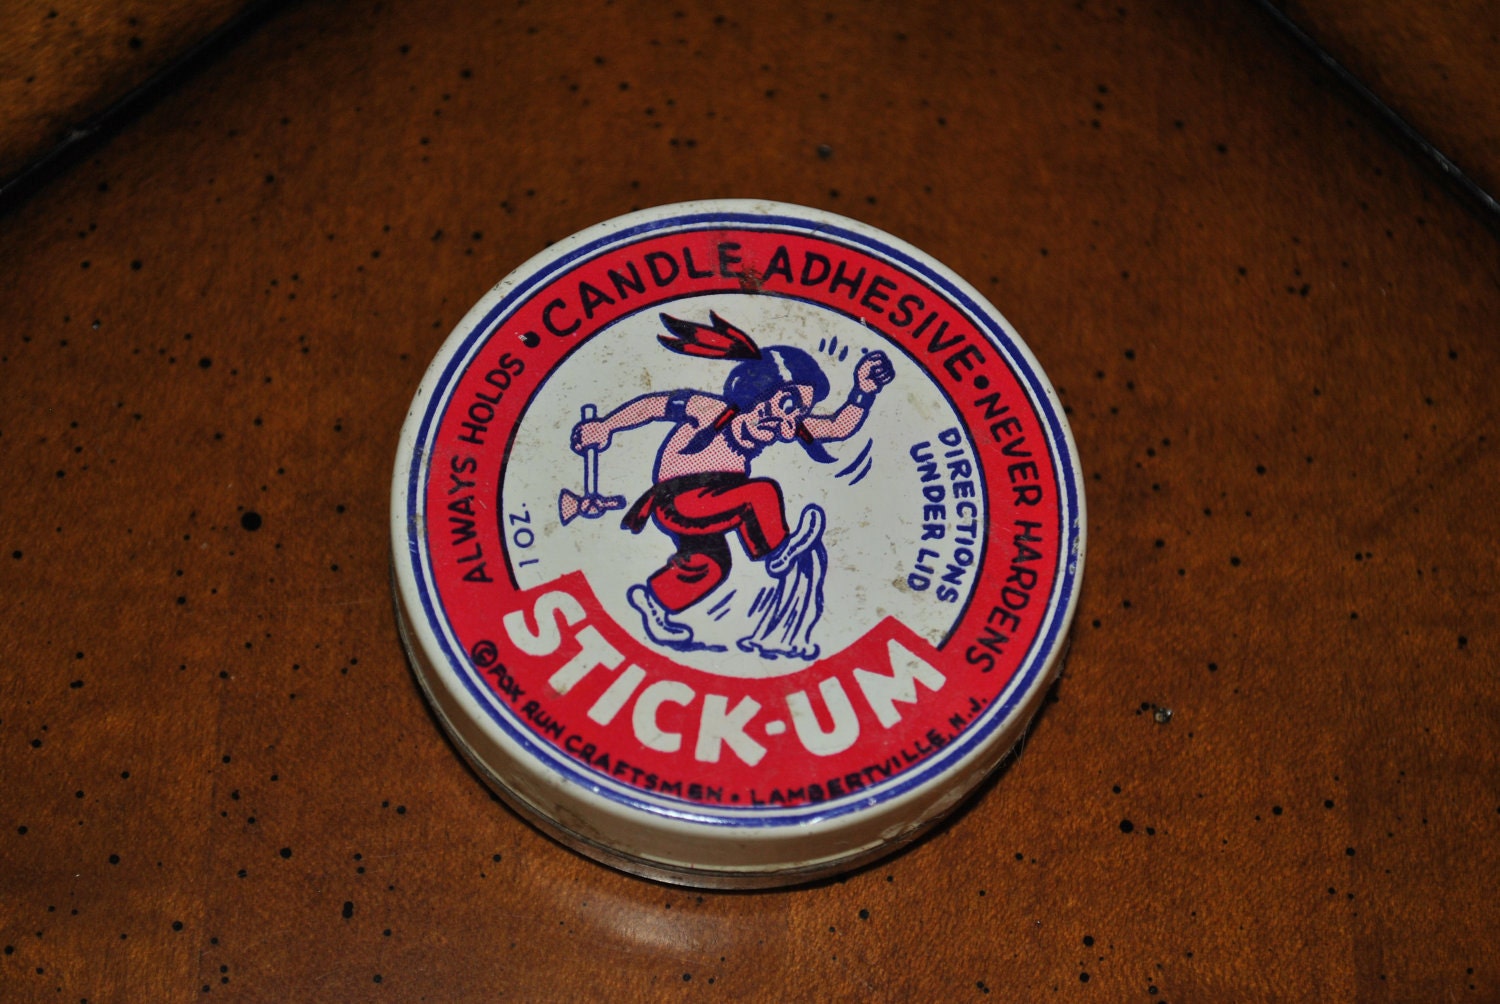 Free: STICK-UM CANDLE ADHESIVE - Home Decor -  Auctions for  Free Stuff